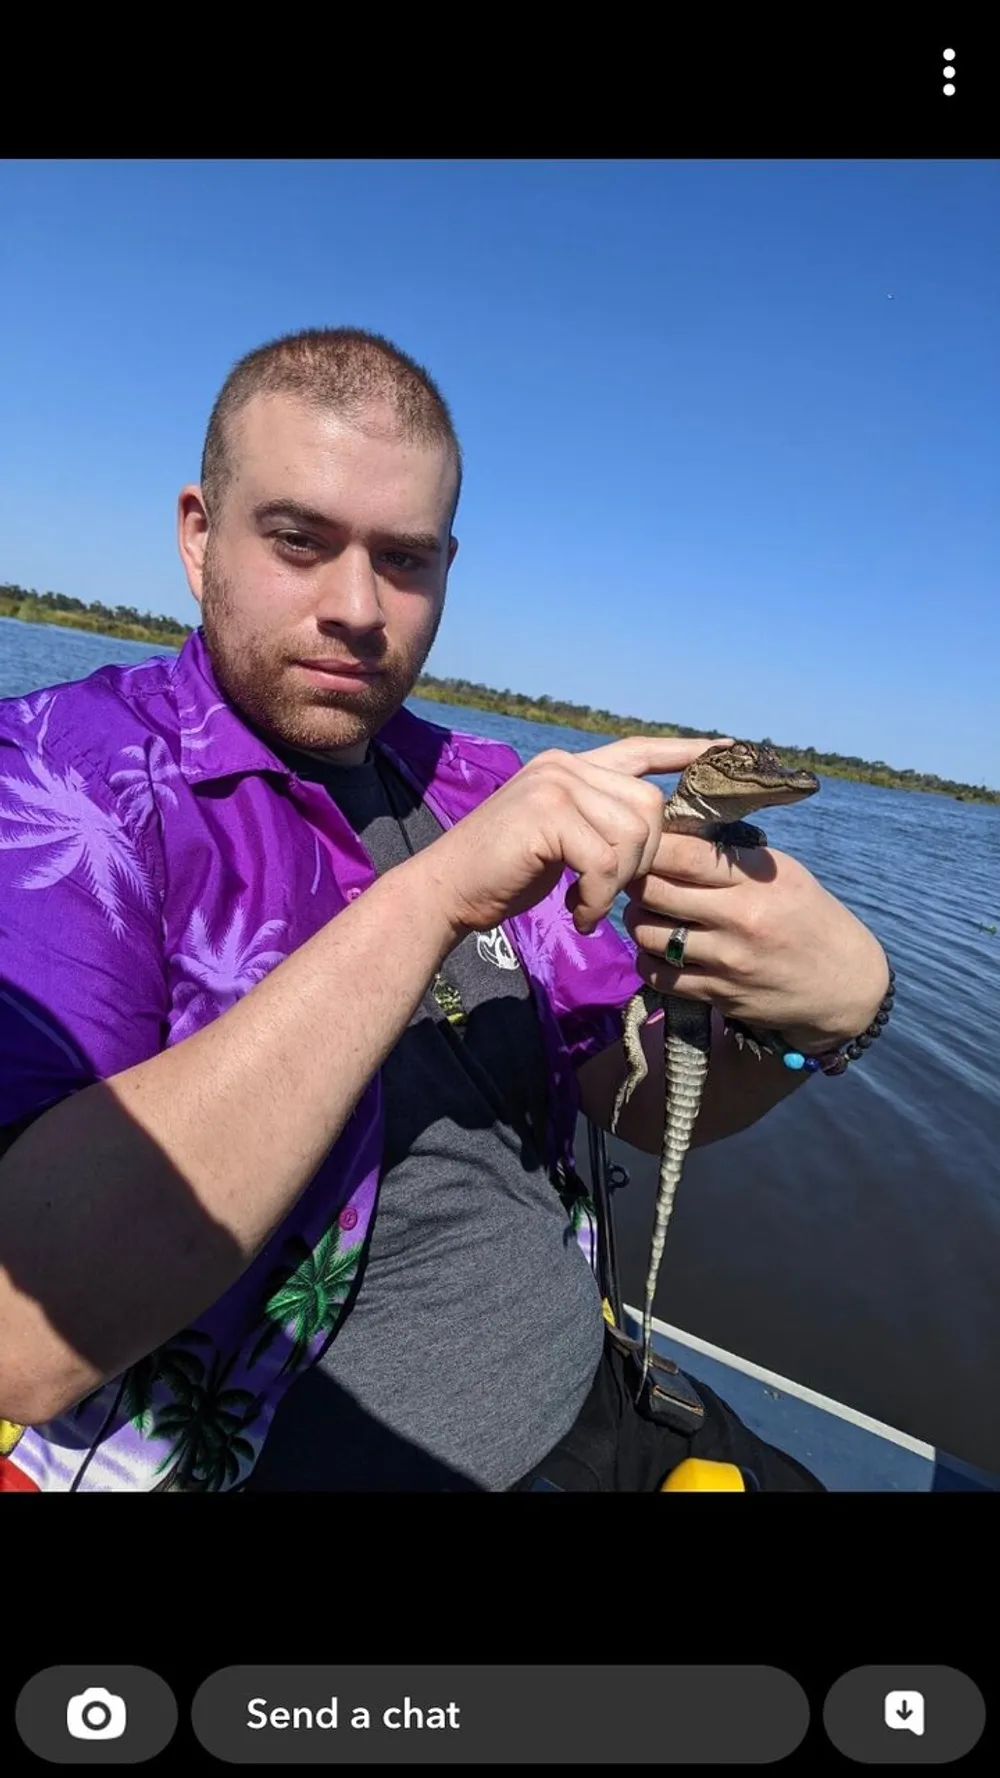 A person in a purple shirt is holding a small alligator on a boat with a lake and clear sky in the background